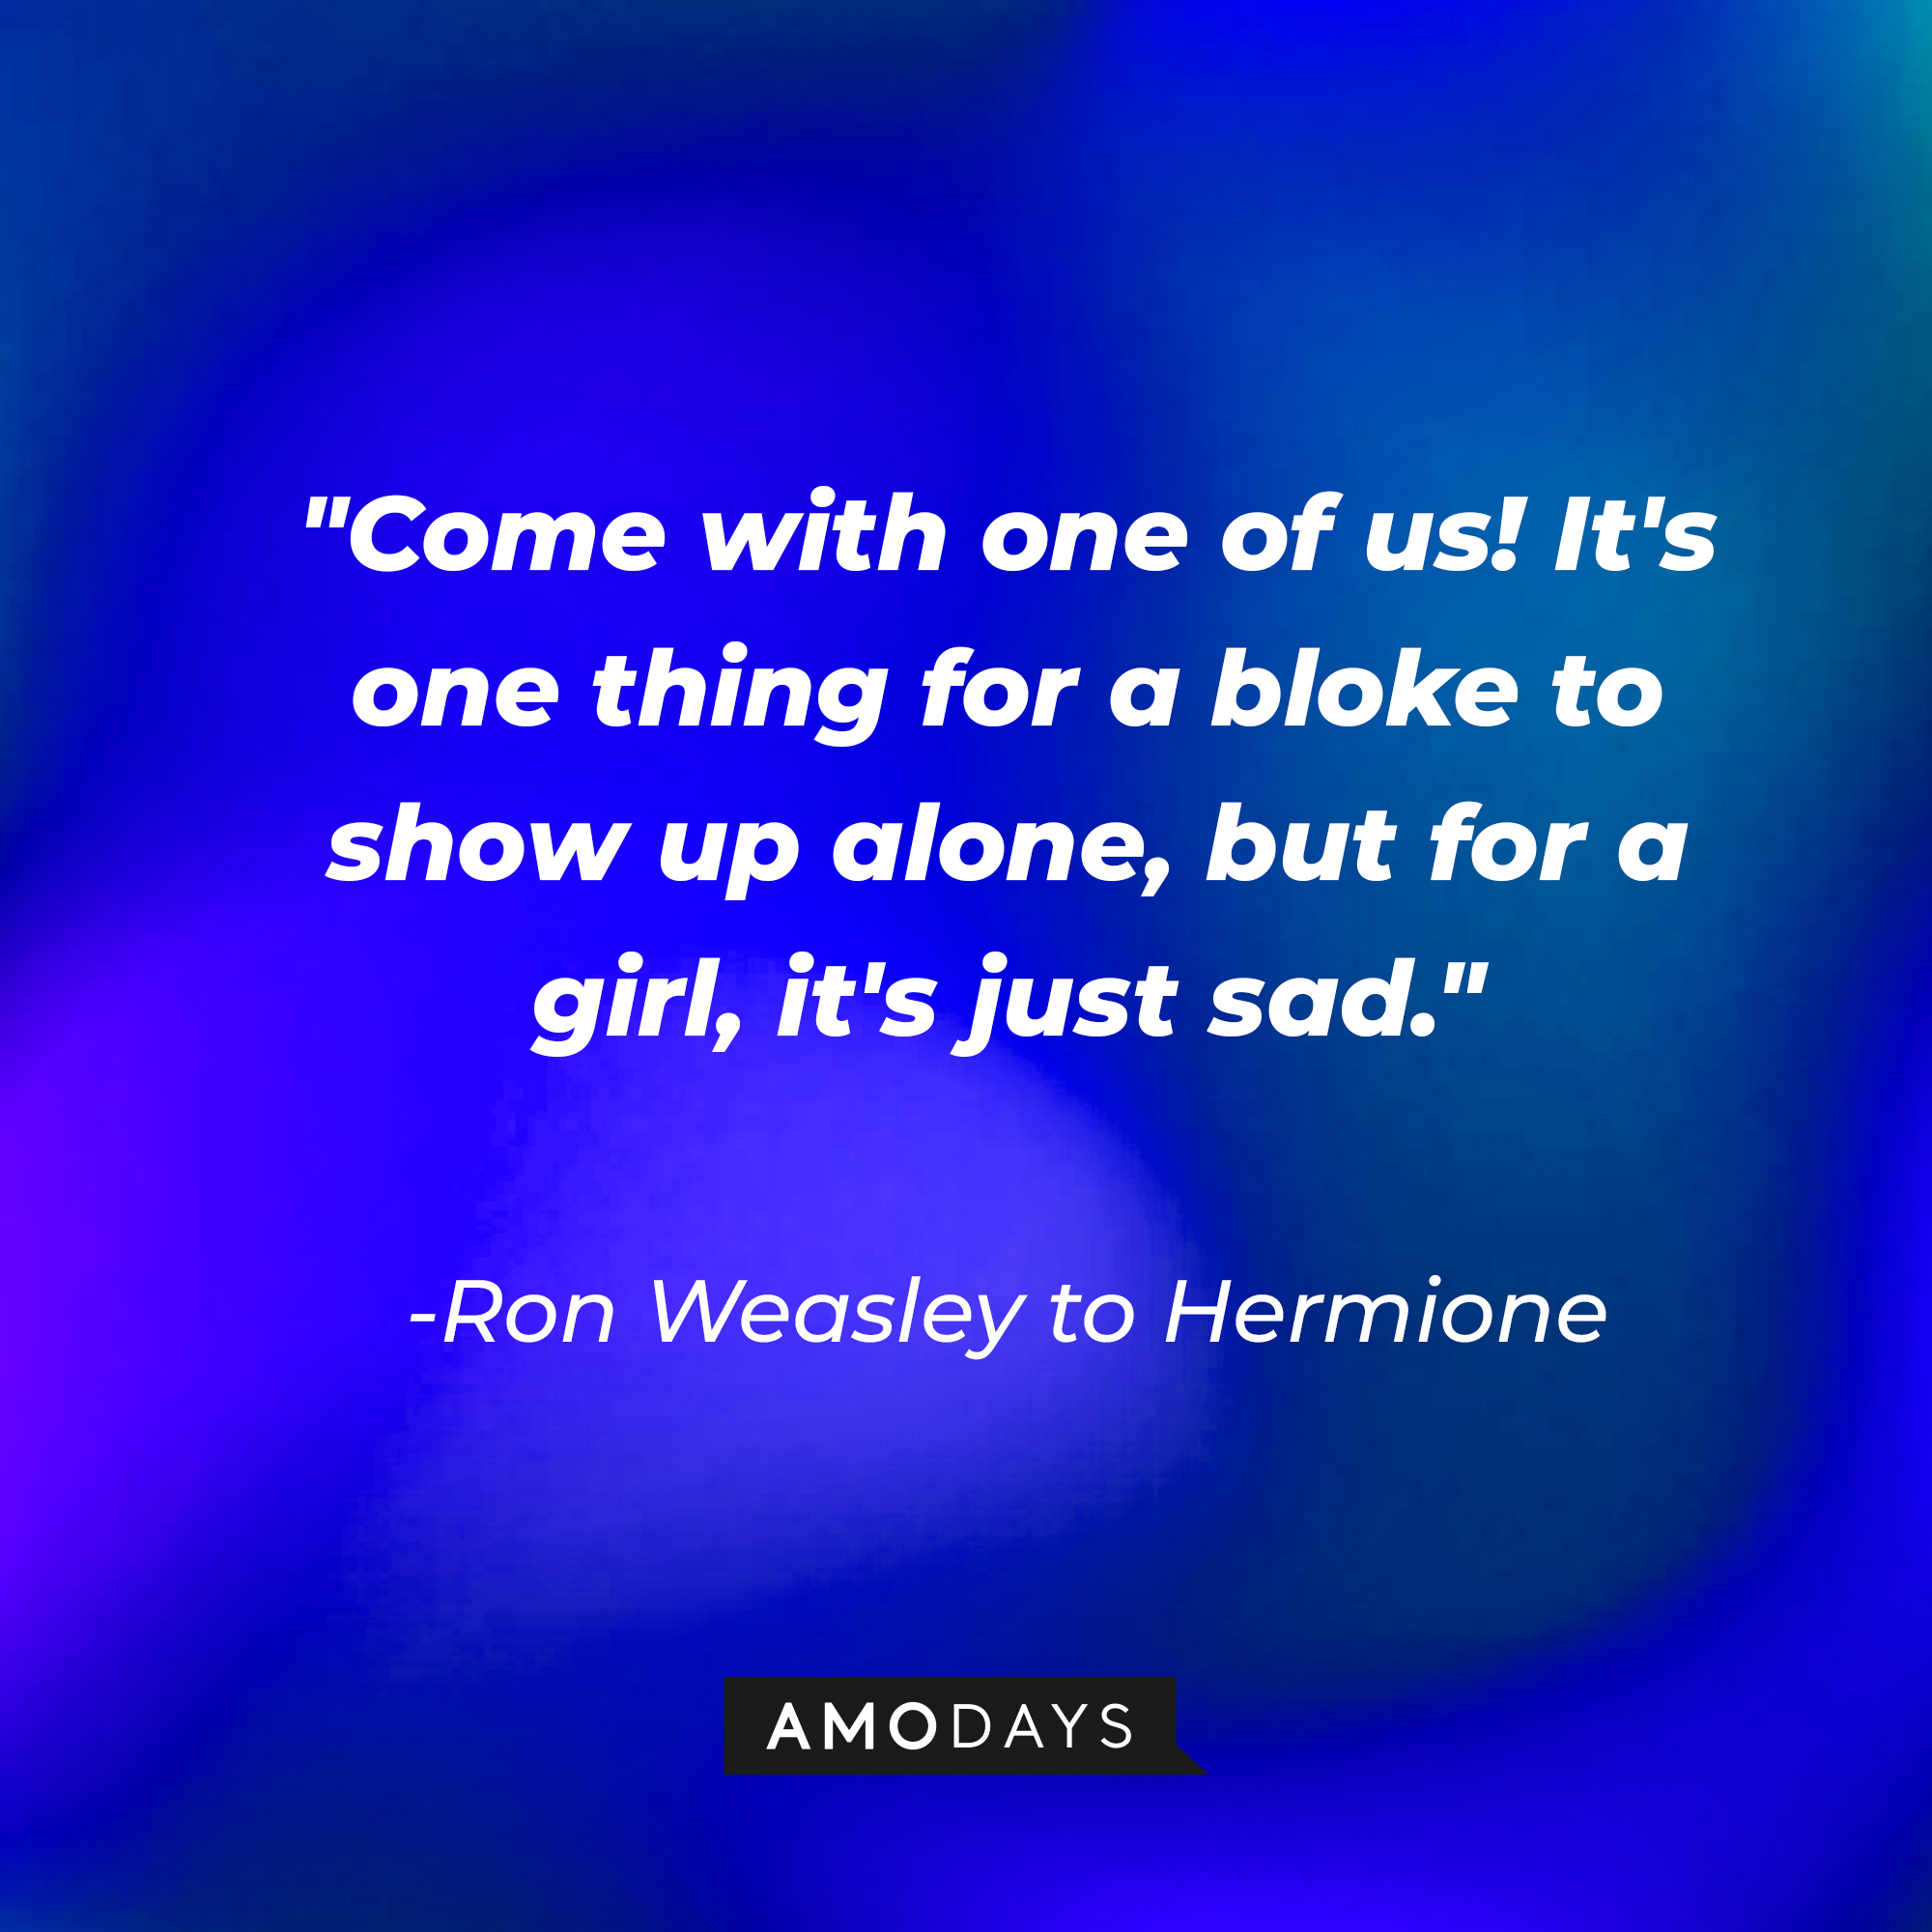 Ron Weasley's quote: "Come with one of us! It's one thing for a bloke to show up alone, but for a girl it's just sad." Image: Amodays